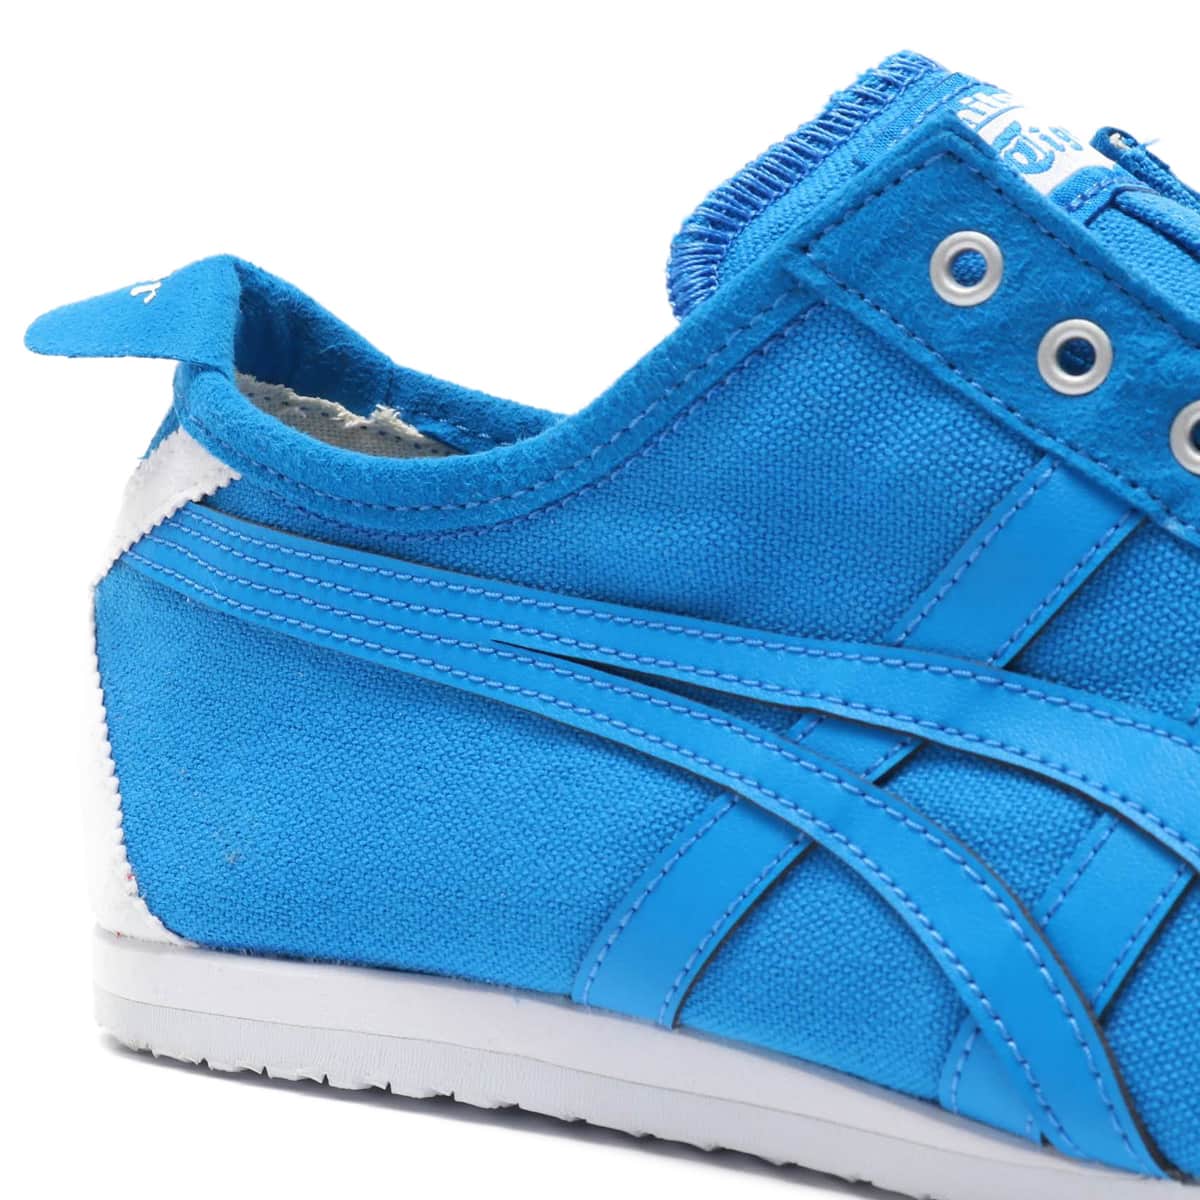 Onitsuka Tiger MEXICO 66 SLIP-ON DIRECTOIRE BLUE/DIRECTOIRE BLUE 